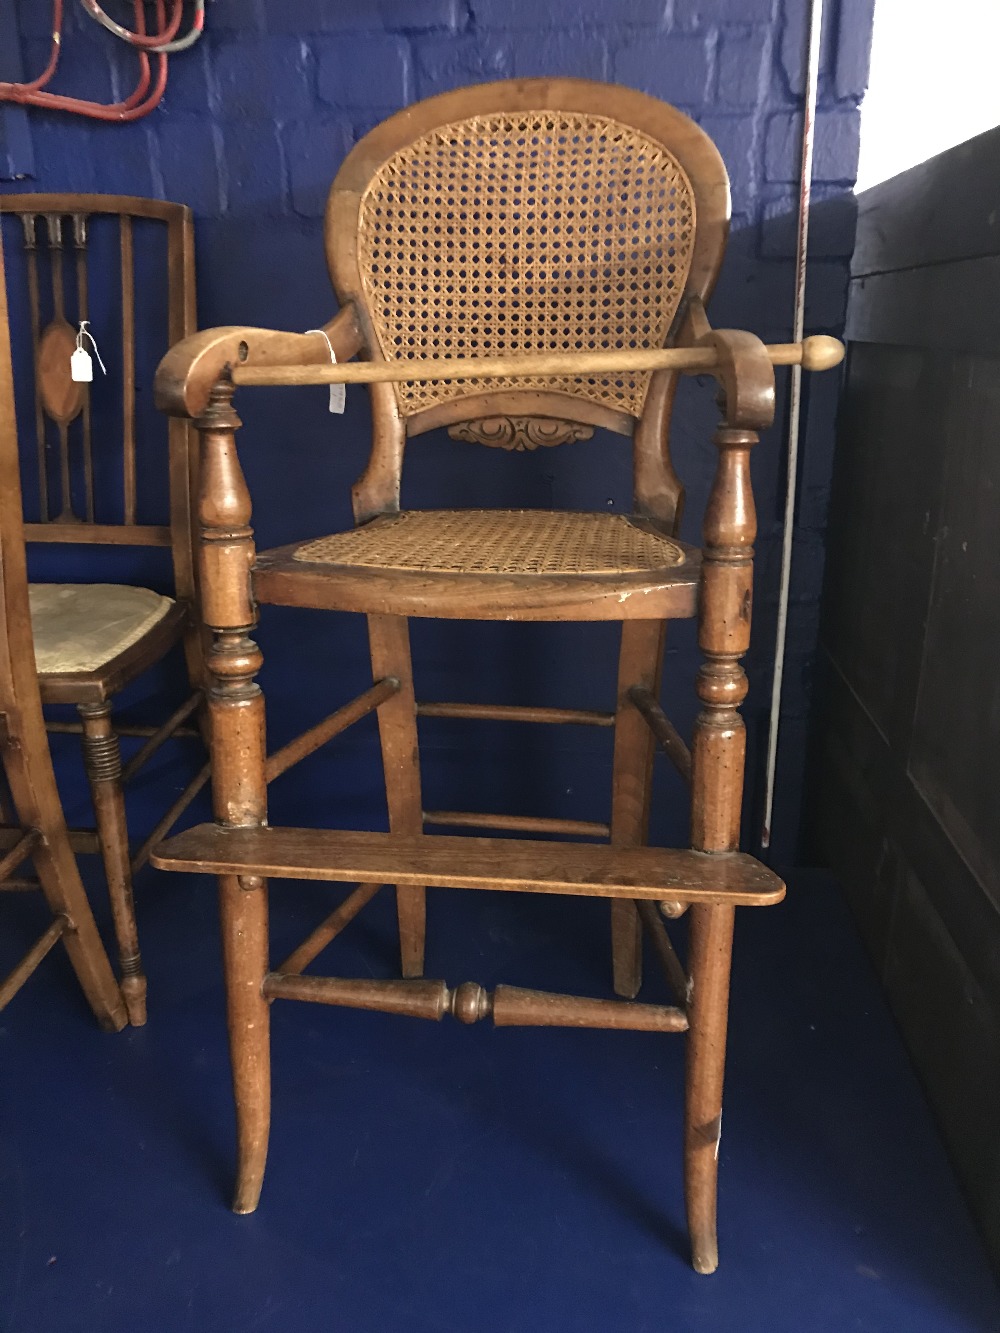 Late 19th cent. Beech & rattan, hoop back child's high chair. 36ins. high - Image 2 of 3